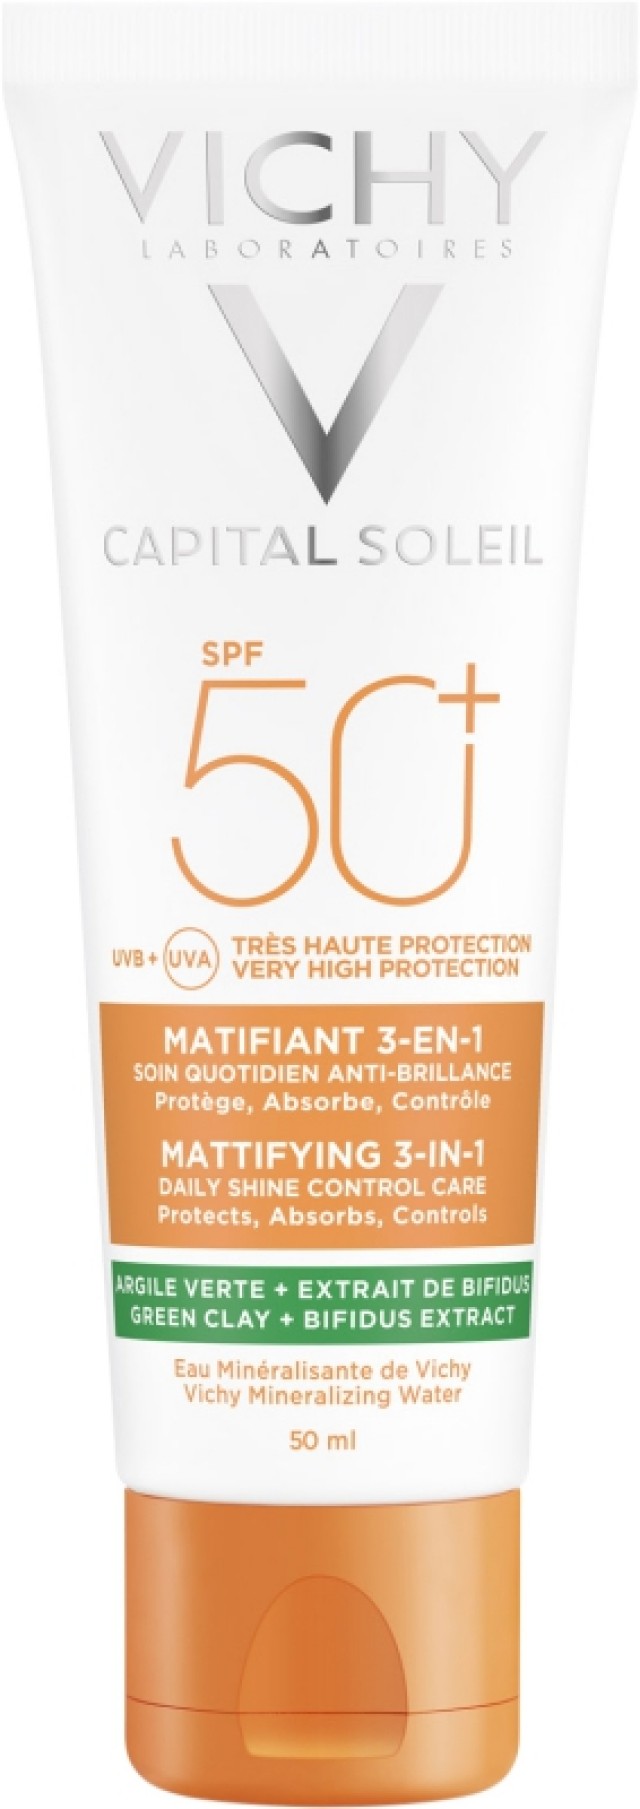 Vichy Capital Soleil Mattifying 3in1 Spf50+, 50ml product photo